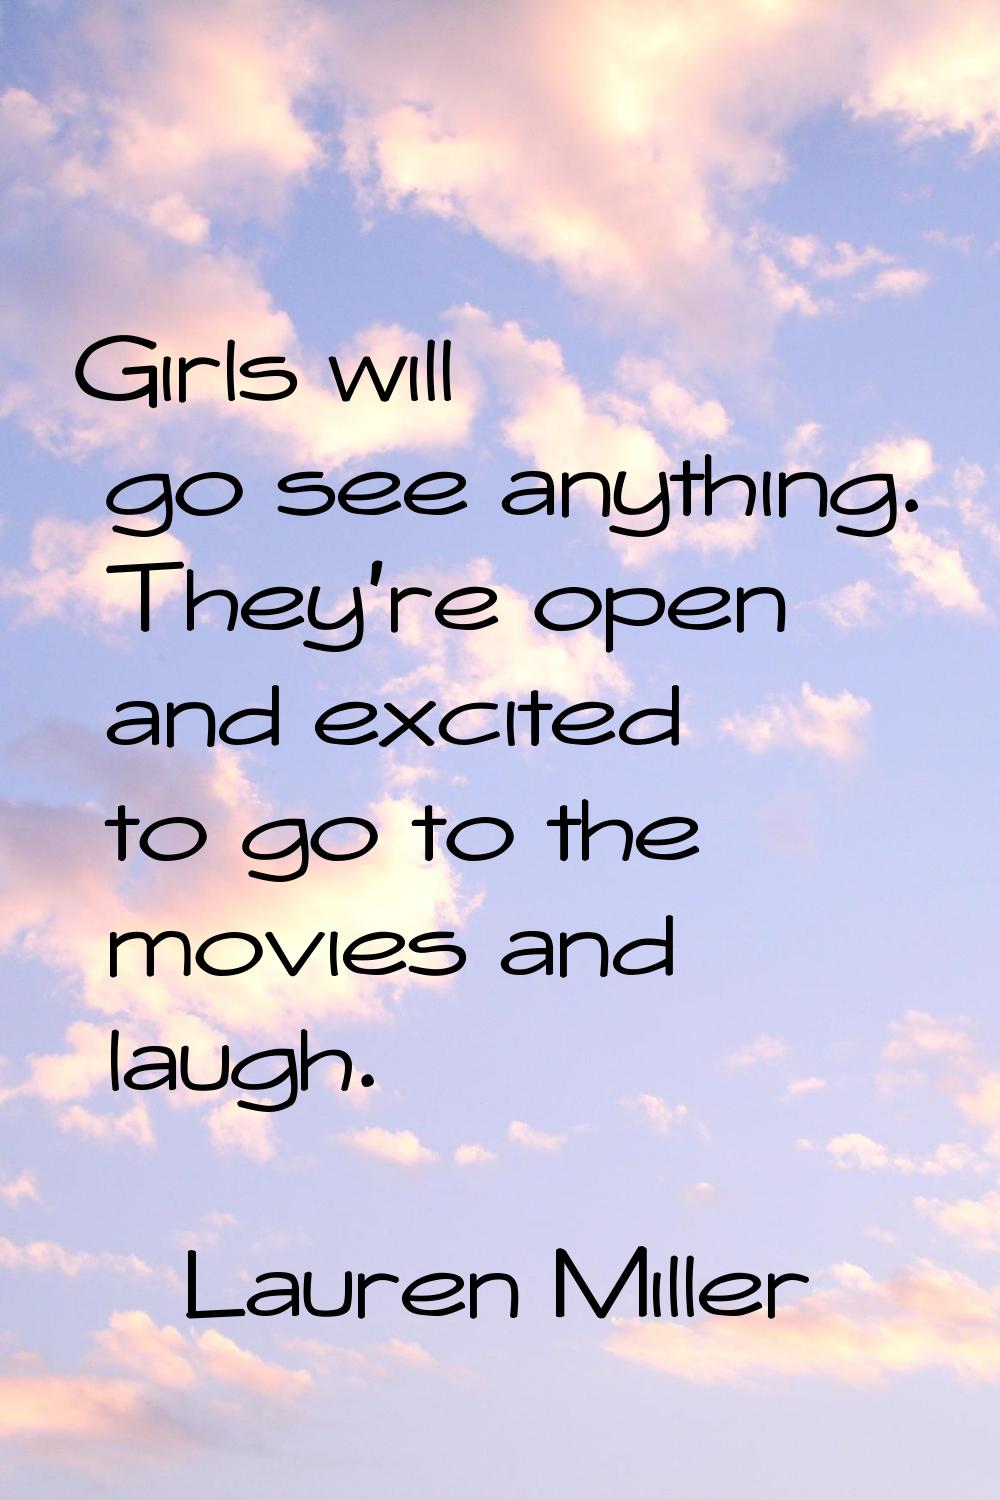 Girls will go see anything. They're open and excited to go to the movies and laugh.